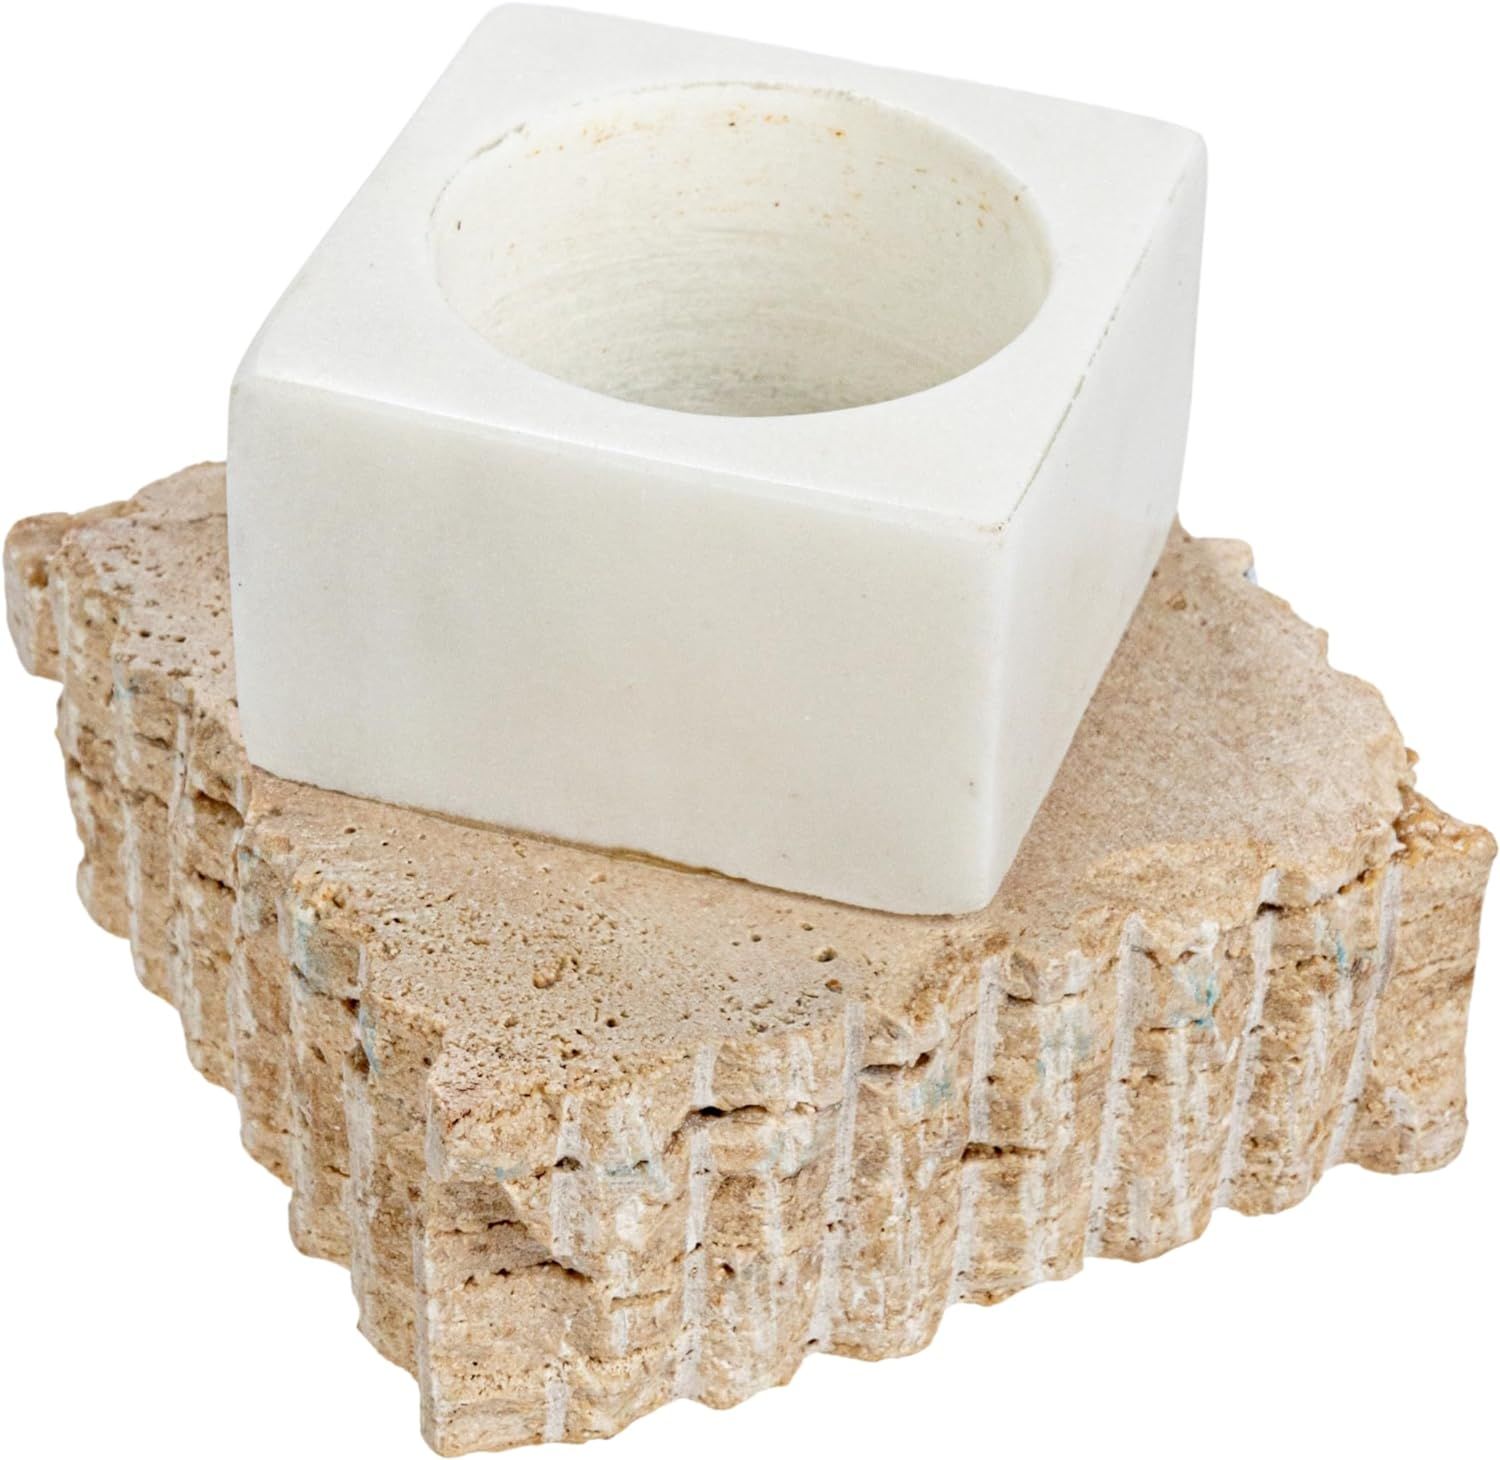 Bloomingville Decorative Marble and Travertine Candle Holder, White and Natural | Amazon (US)